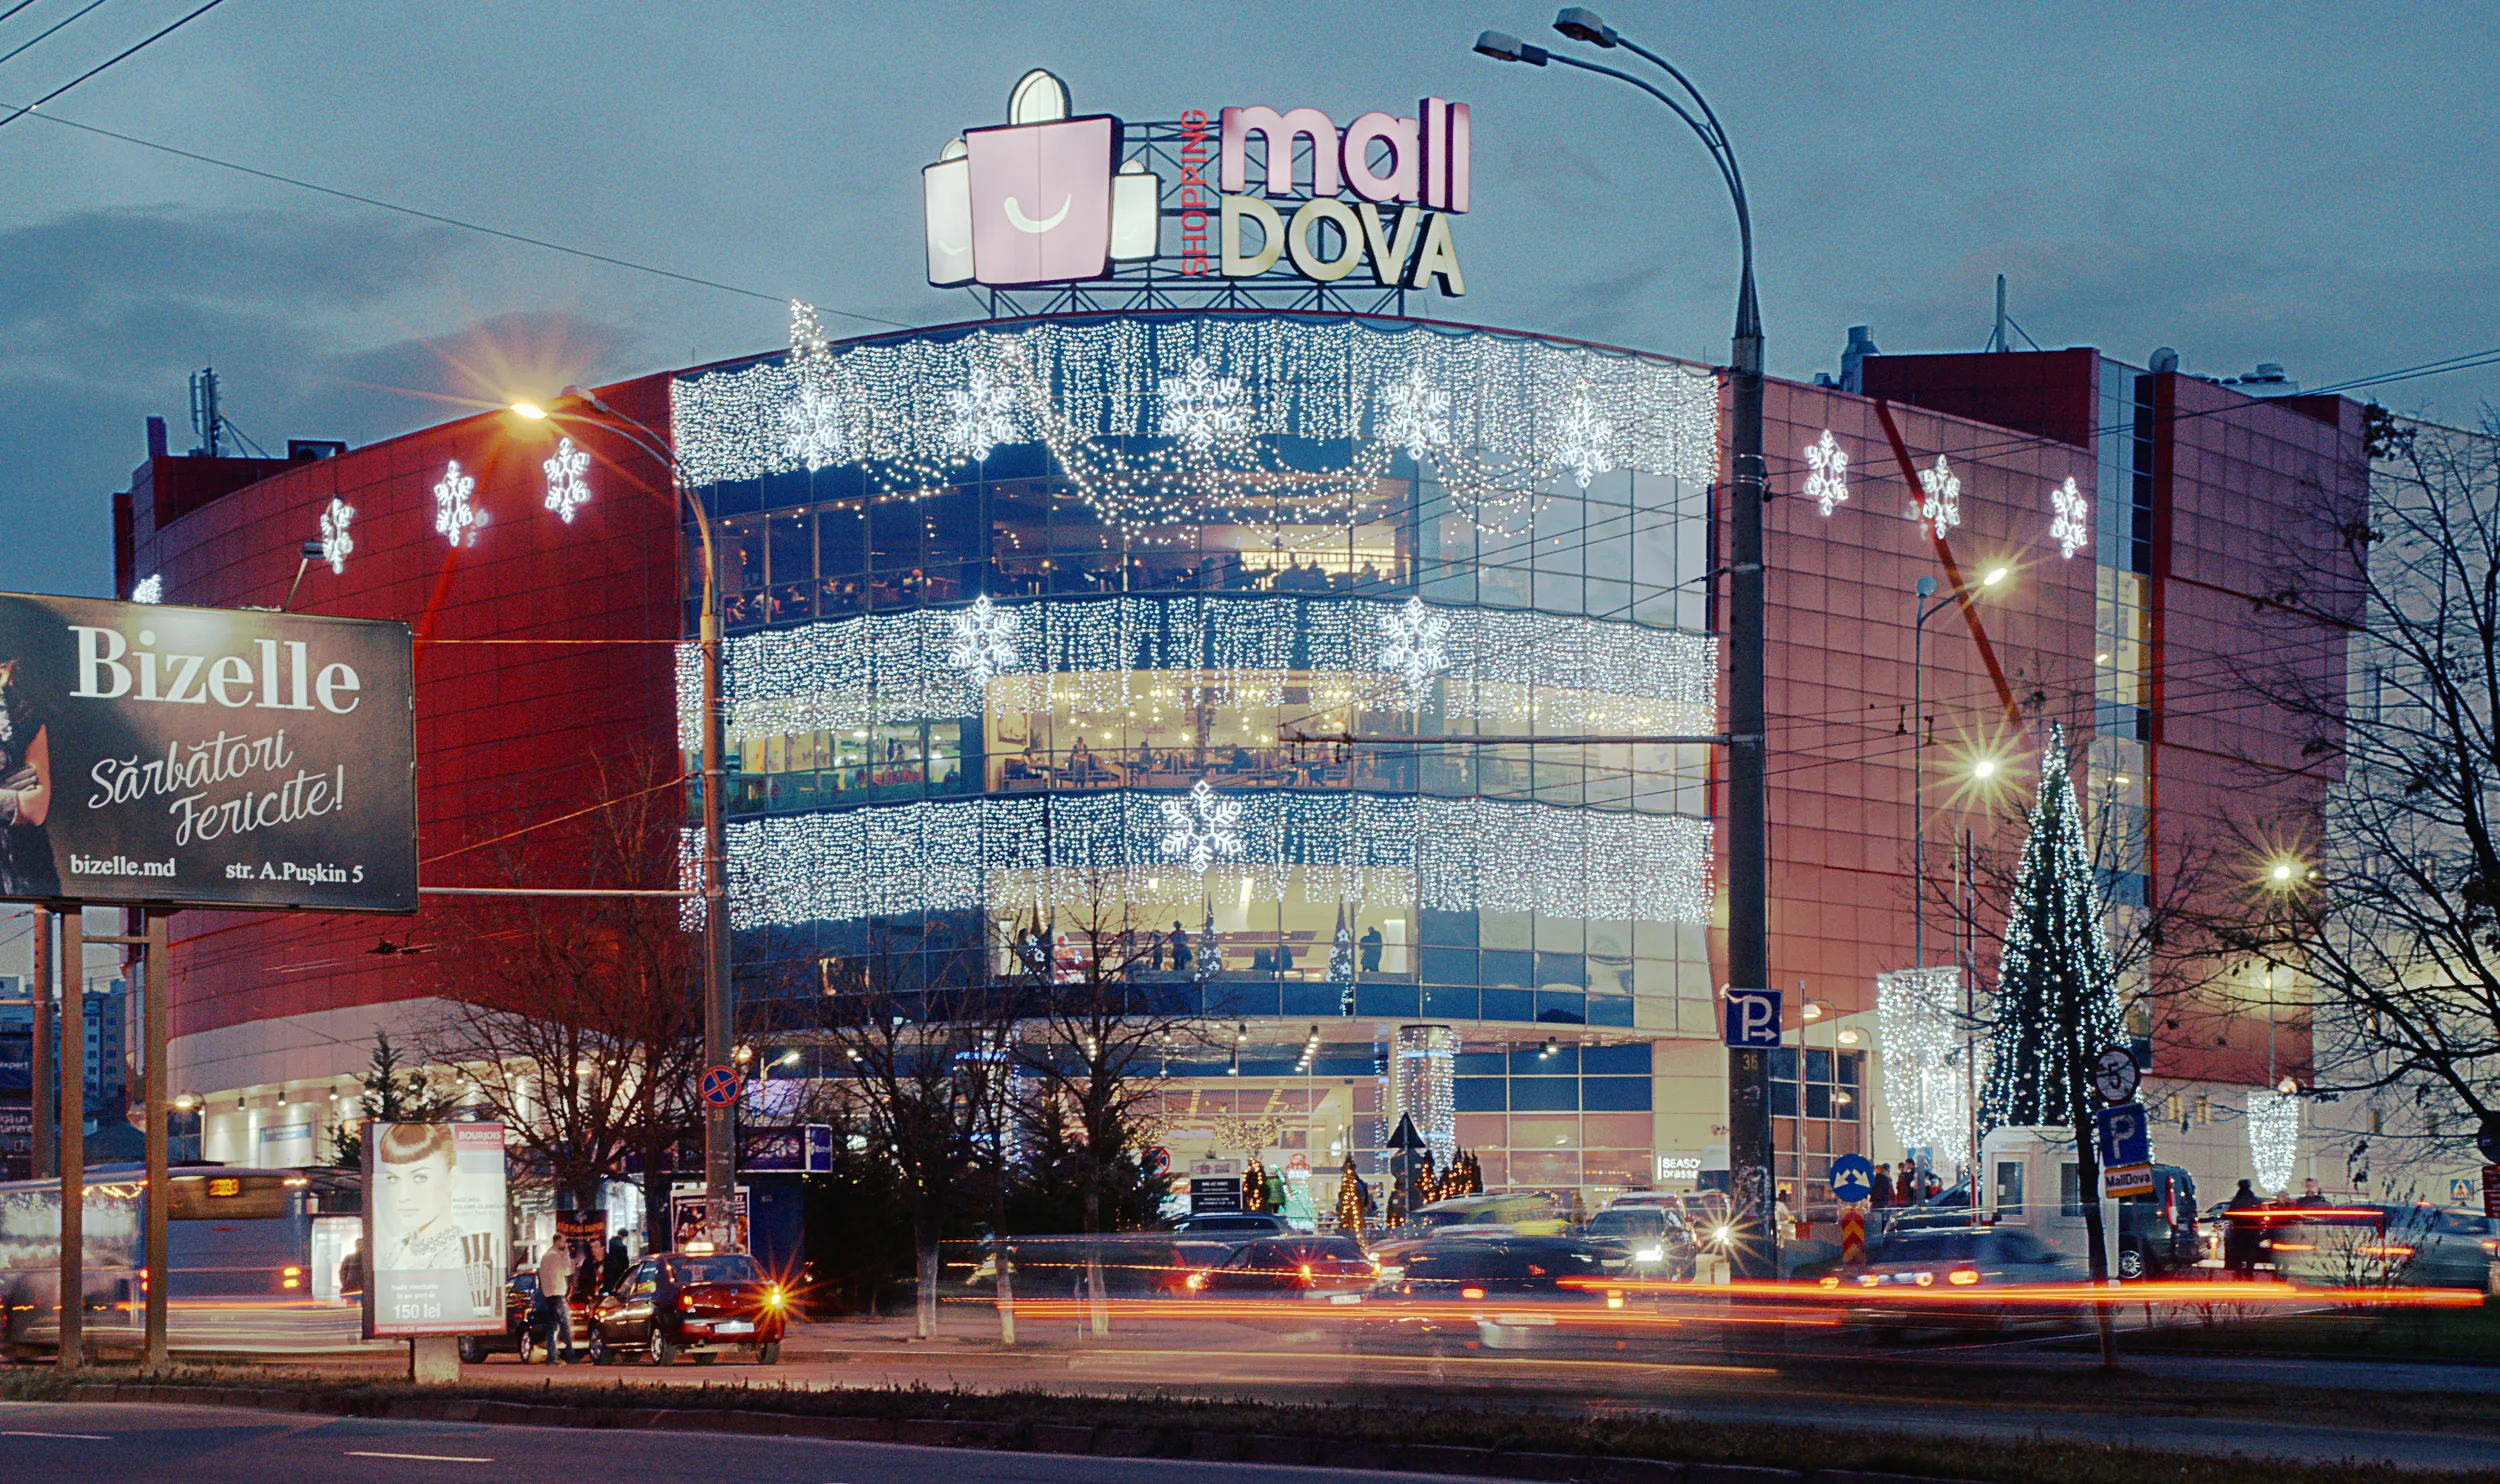 MallDova in Moldova, europe | Handbags,Shoes,Accessories,Clothes,Cosmetics,Watches - Country Helper